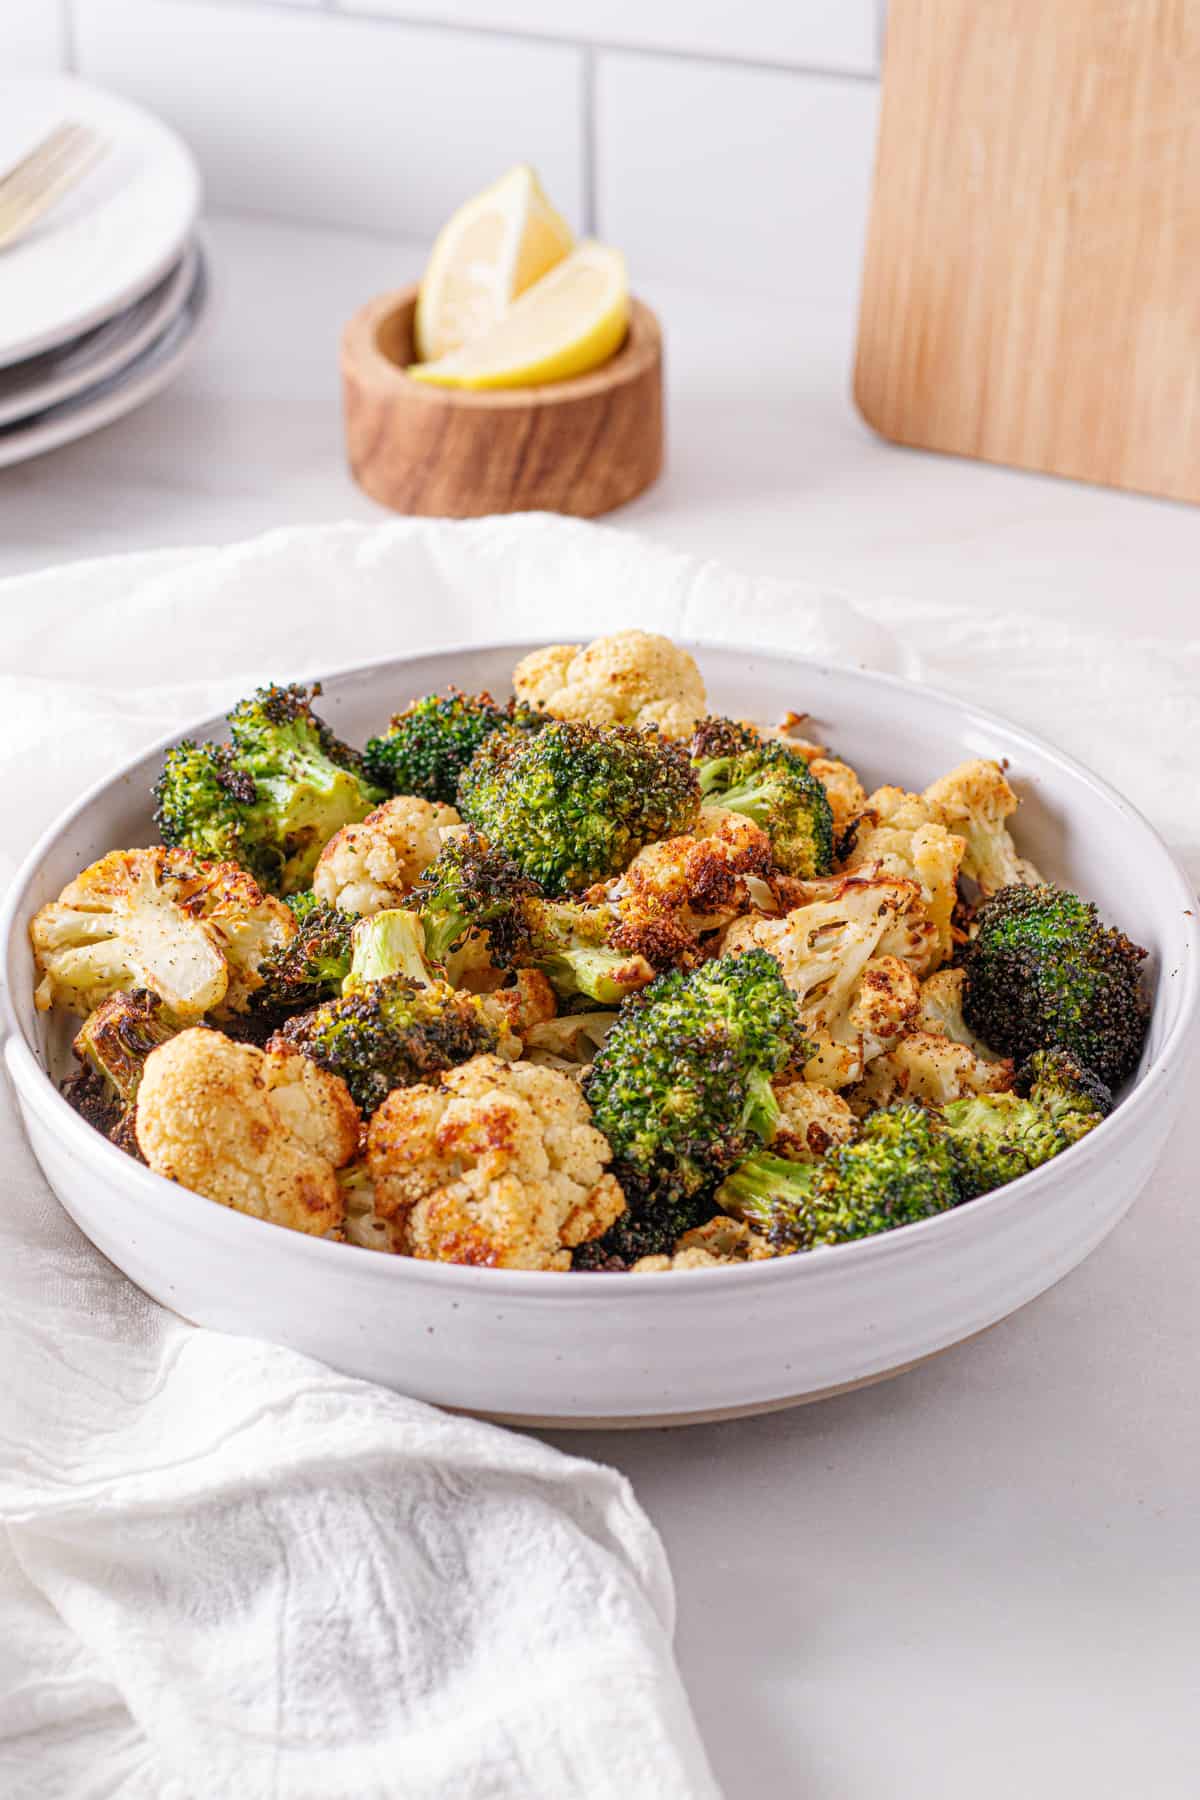 Air fryer broccoli and cauliflower in a white bowl.